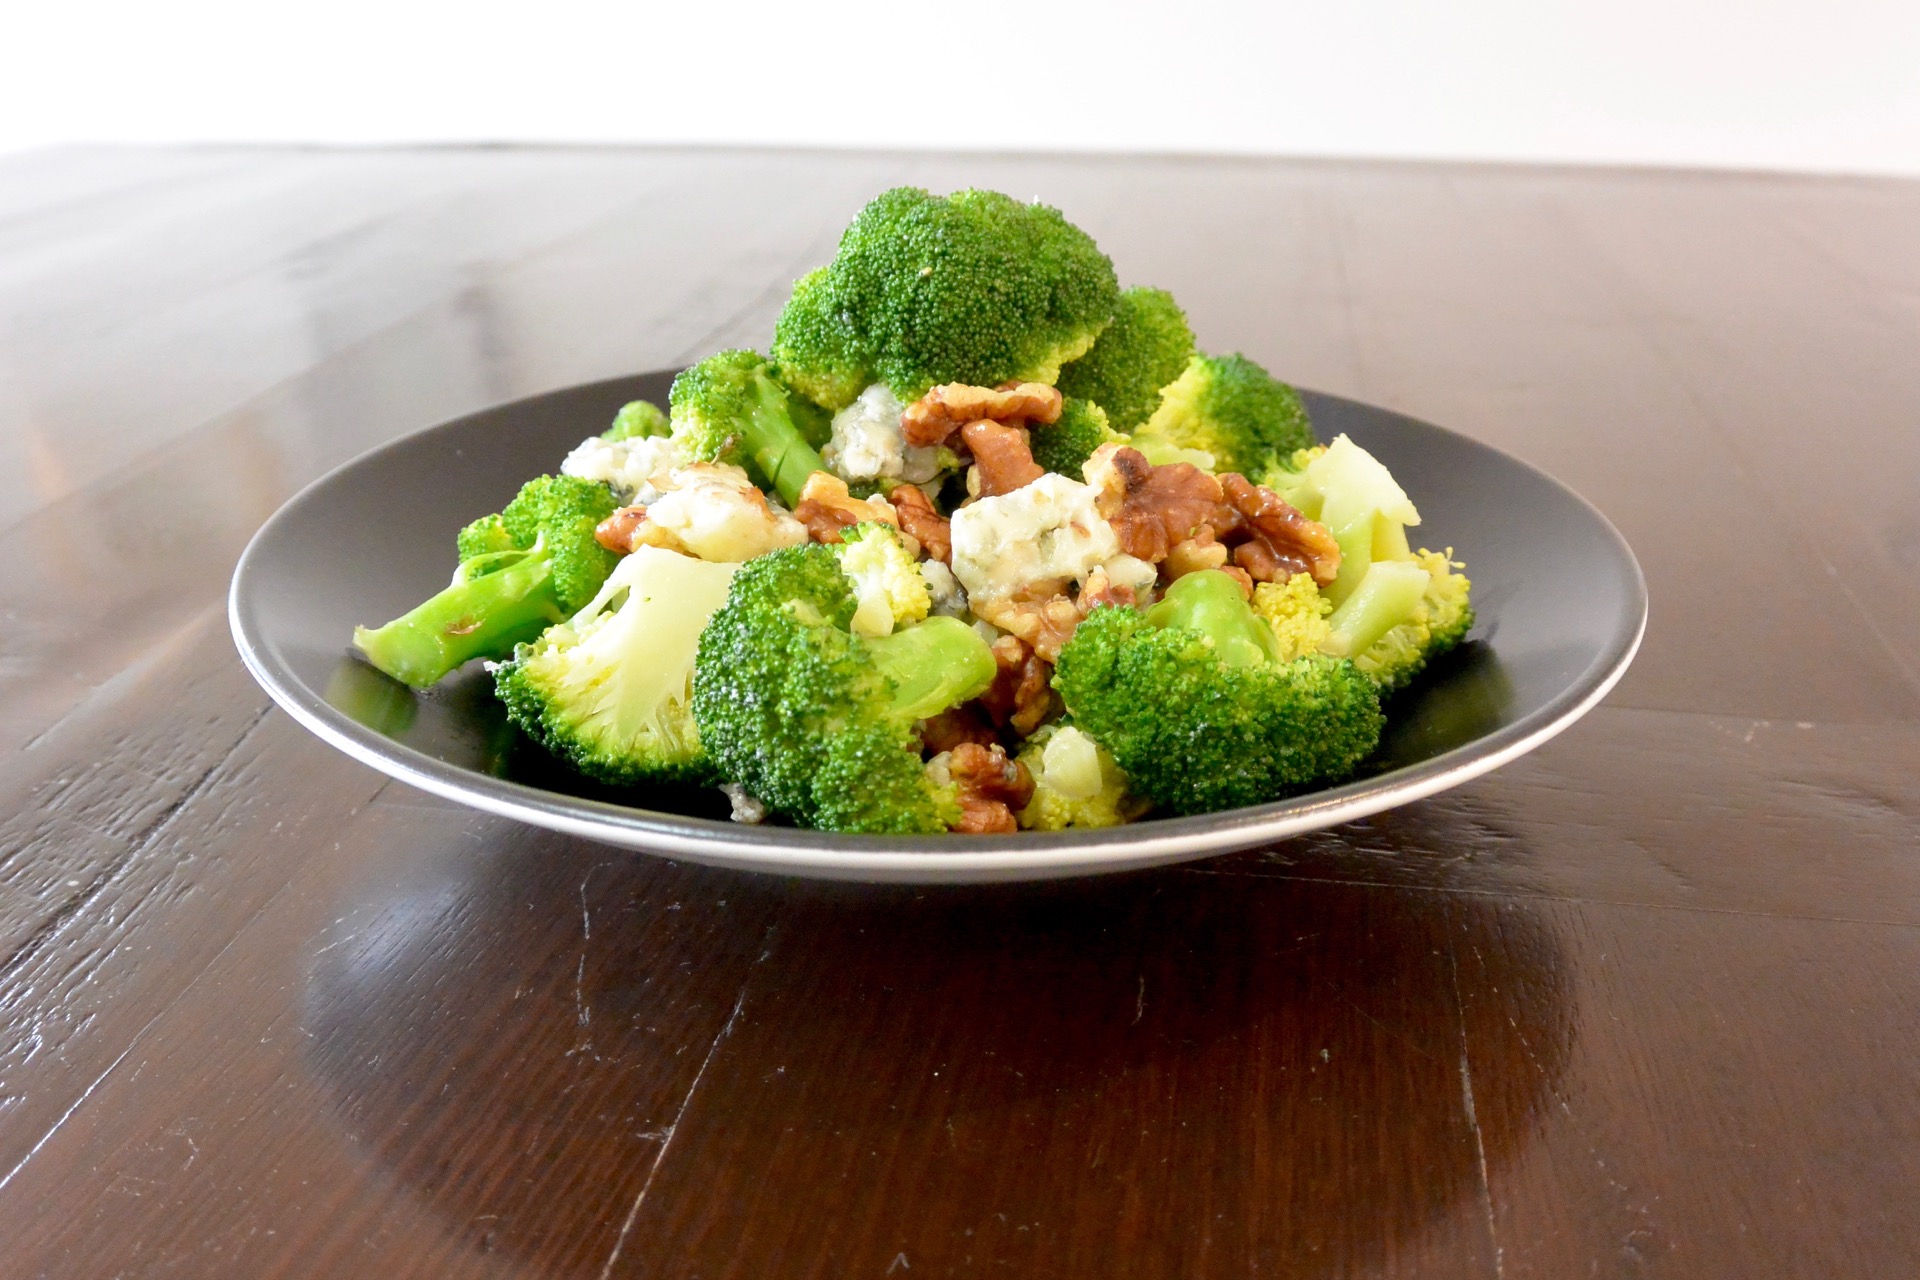 Combi Steam Oven Recipes I Cooking With Steam Steamed Broccoli Toasted Walnut And Gorgonzola,Cooking Octopus With Cork